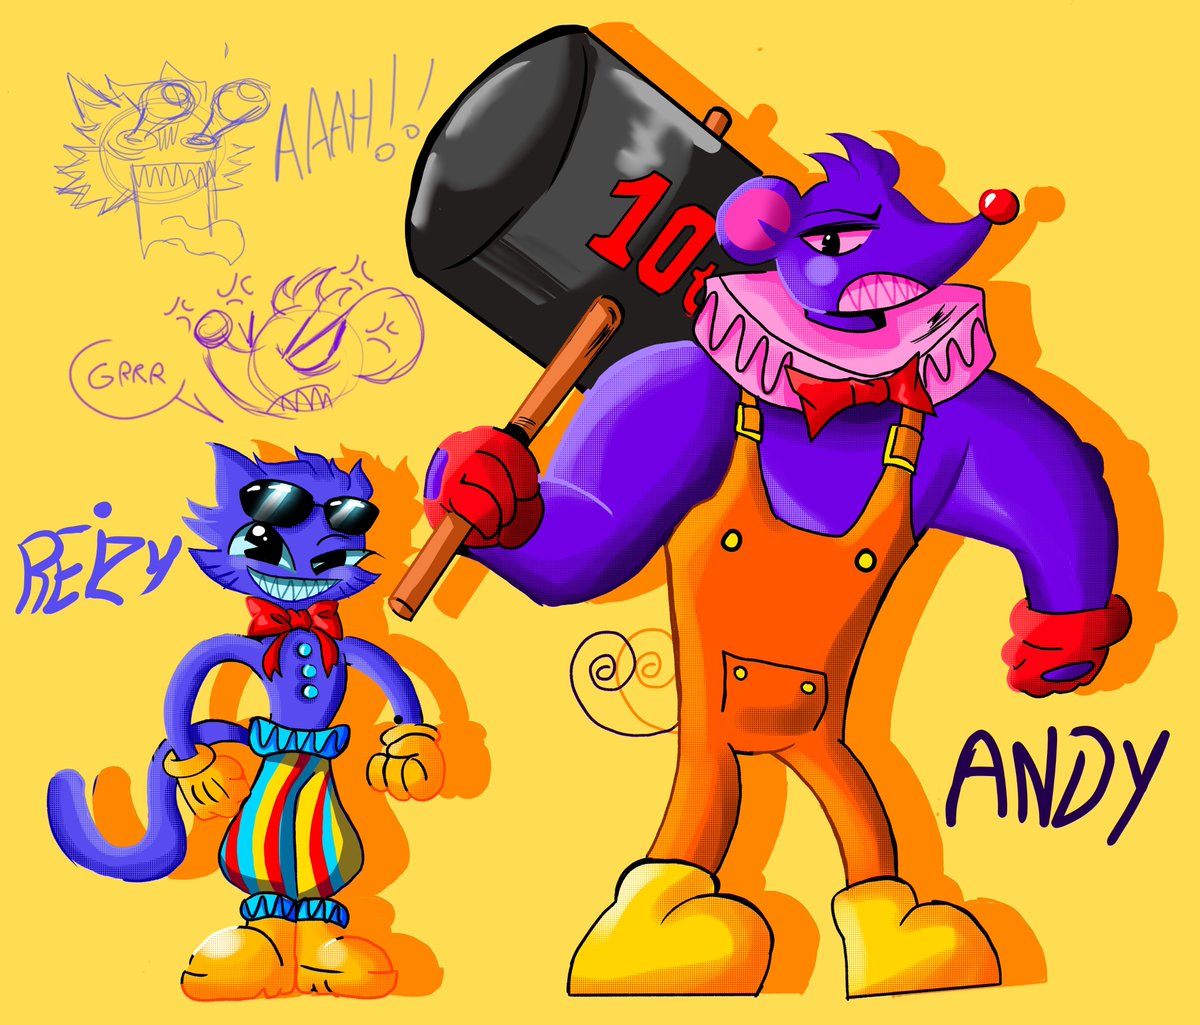 Done! Their name is Reizy and Andy! Two goofy digitalcharacters frome #TheAmazingDigitalCircusOC